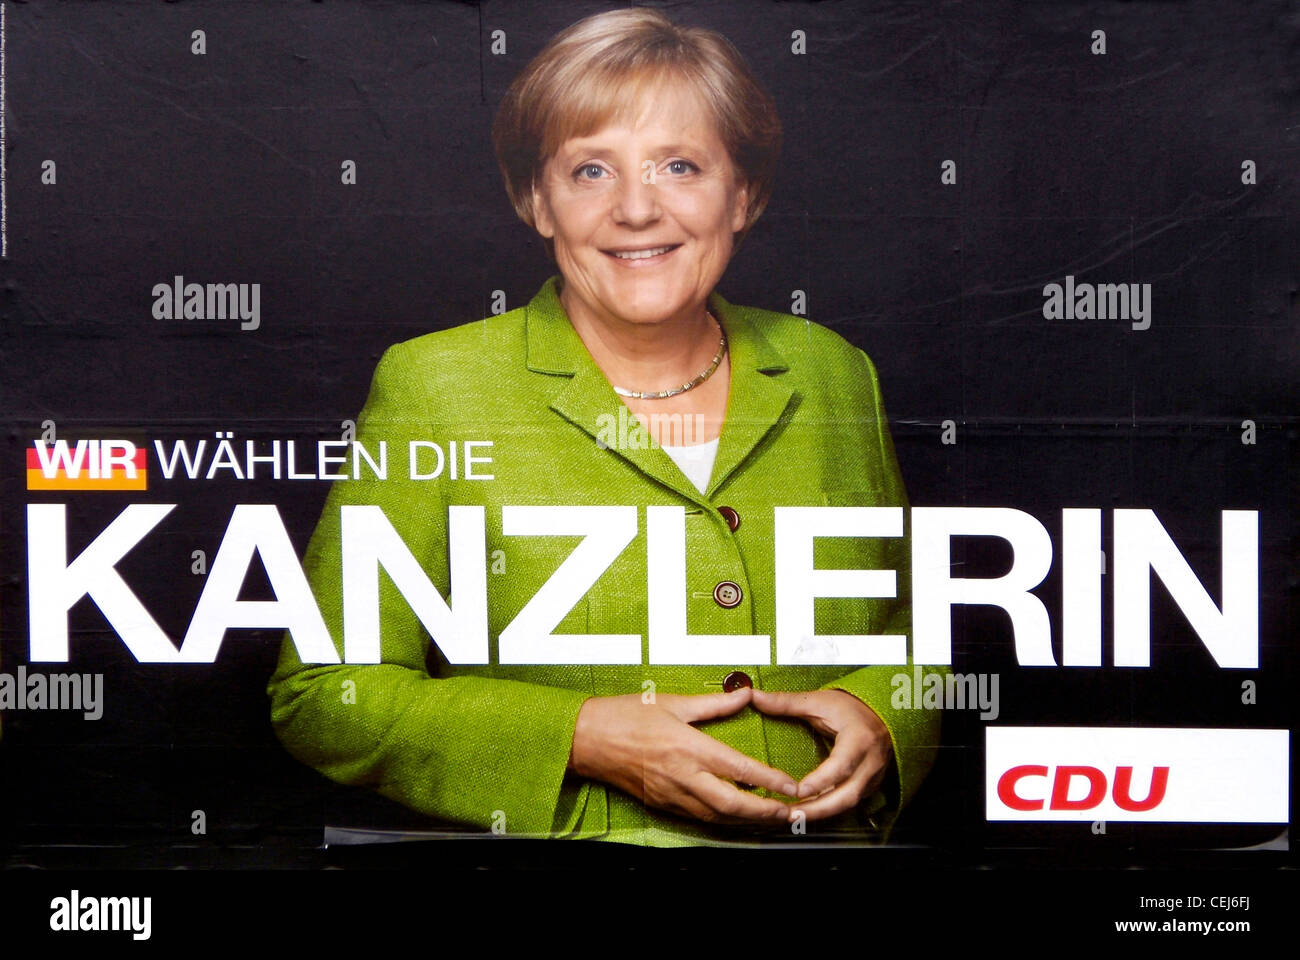 Election poster of the German party CDU for Angela Merkel to the Bundestag elections of 2009. Stock Photo